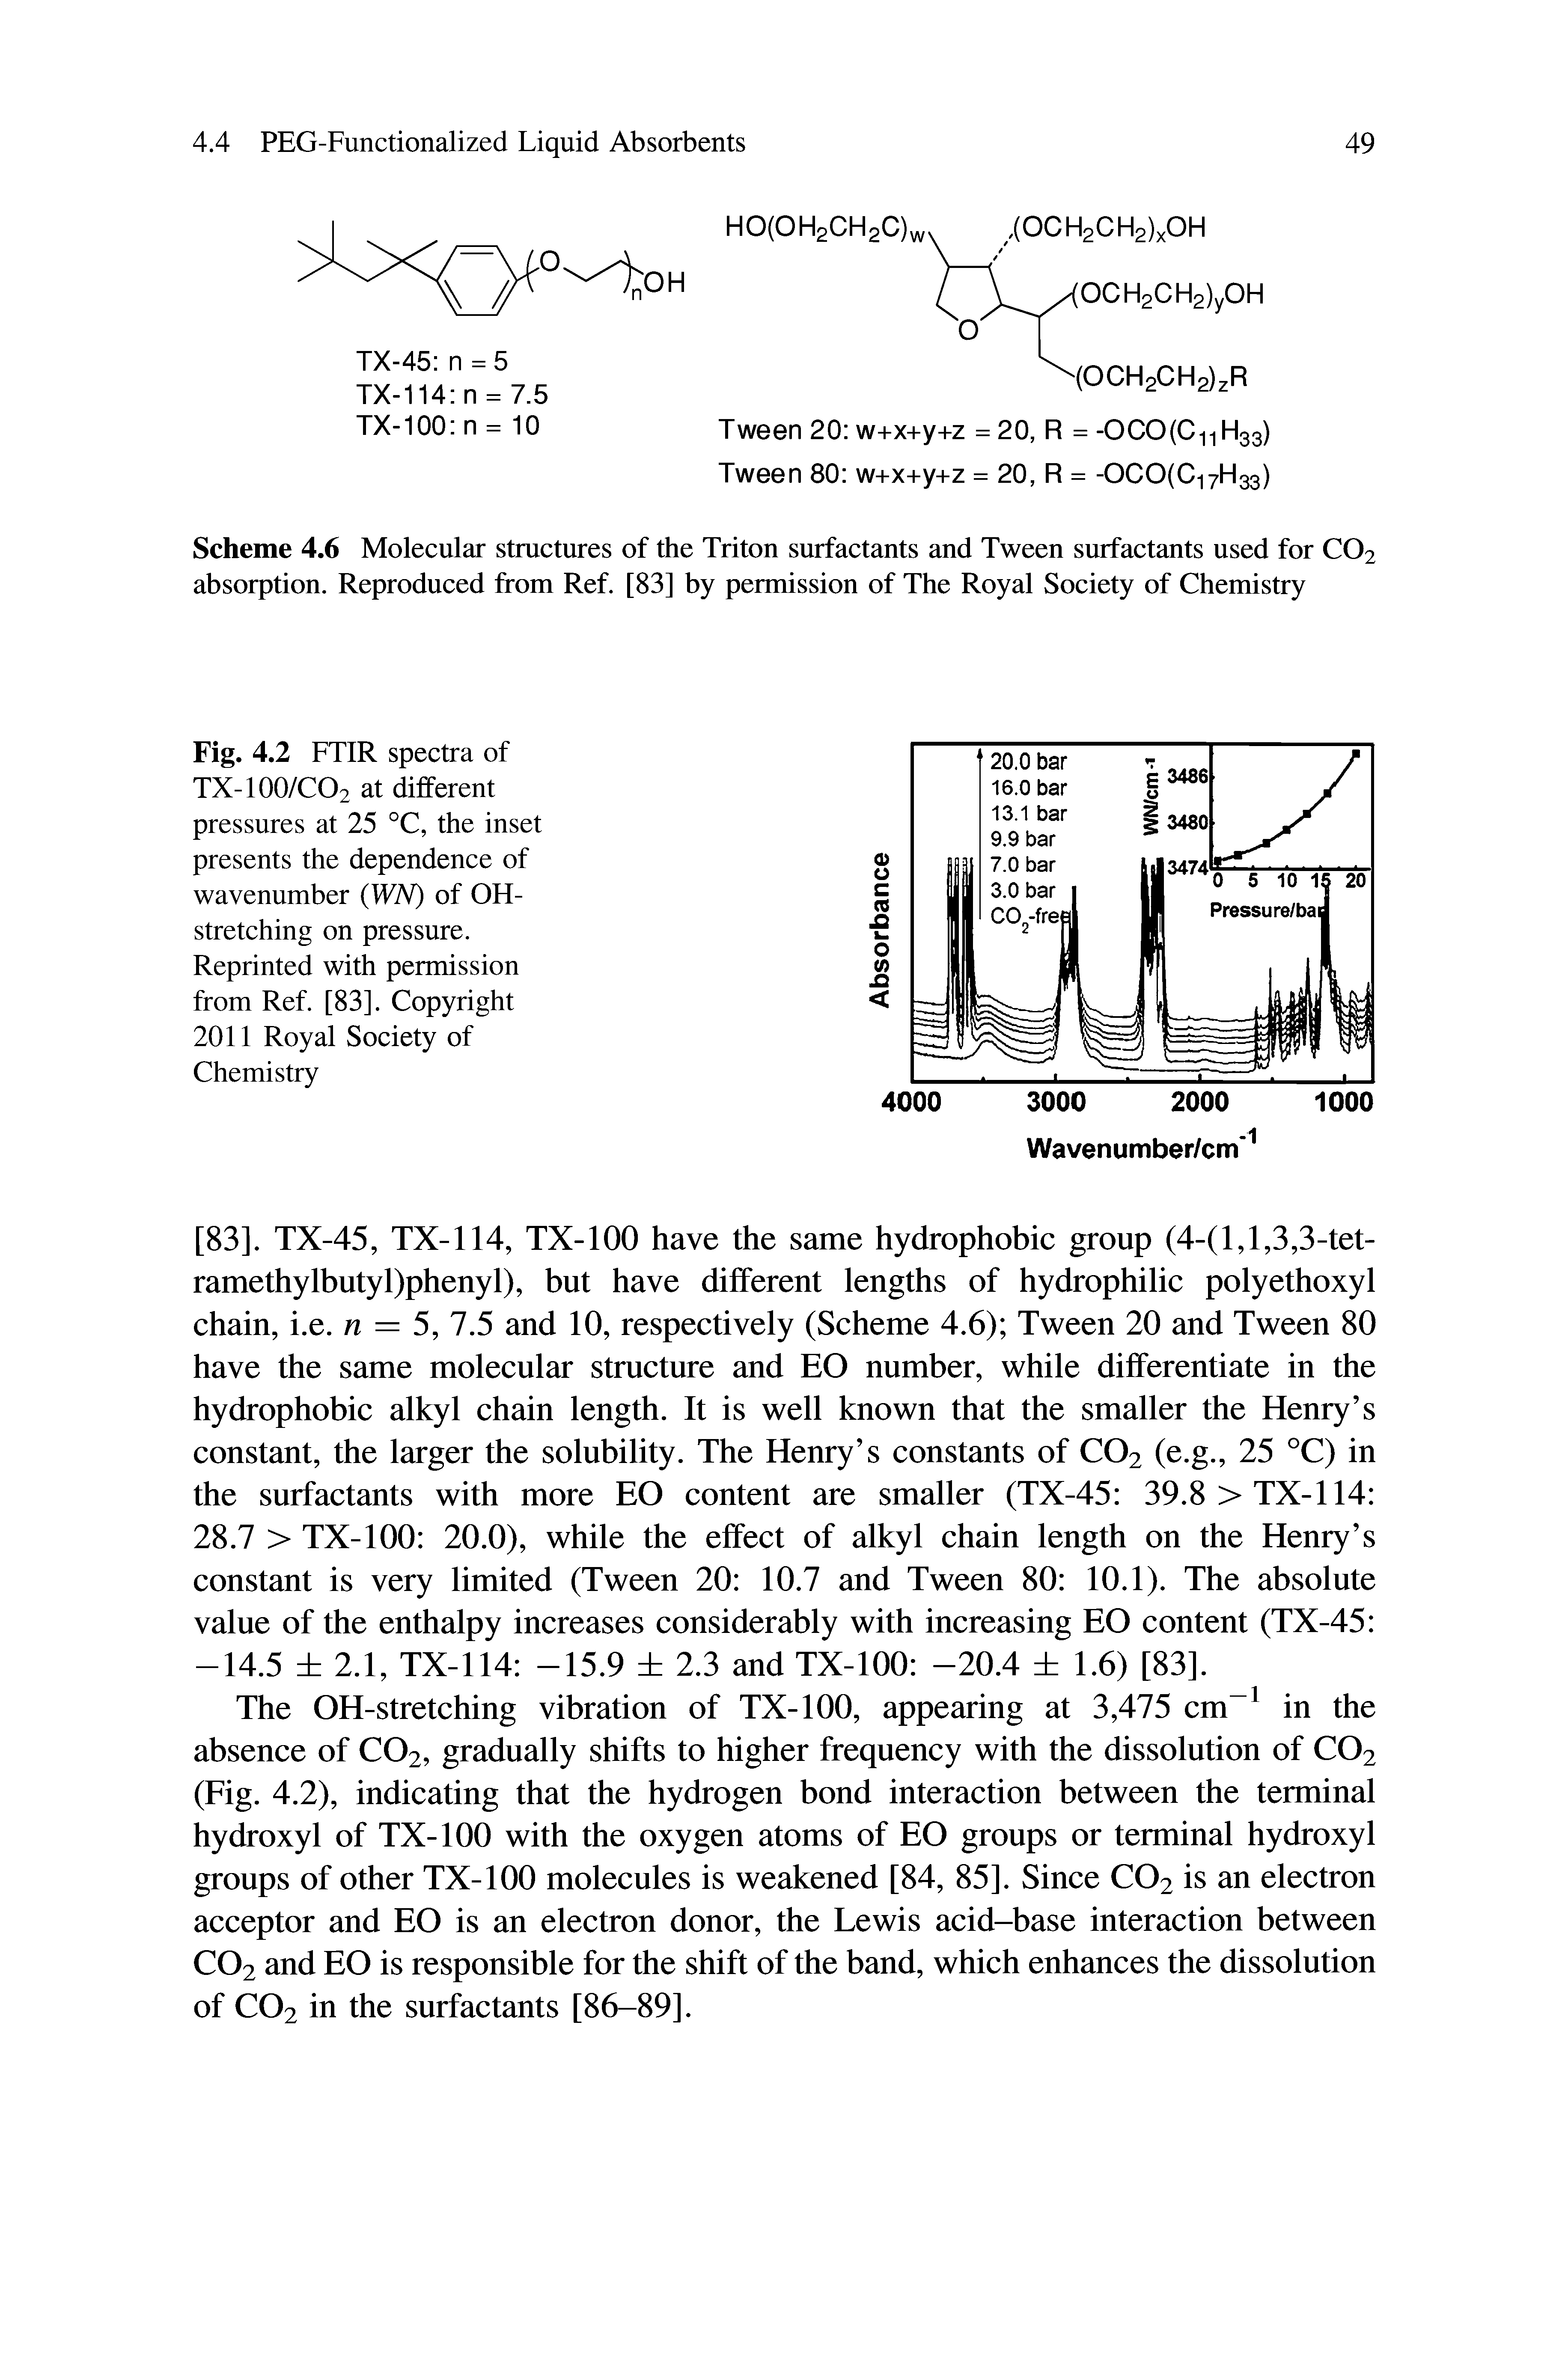 Scheme 4.6 Molecular structures of the Triton surfactants and Tween surfactants used for C02 absorption. Reproduced from Ref. [83] by permission of The Royal Society of Chemistry...